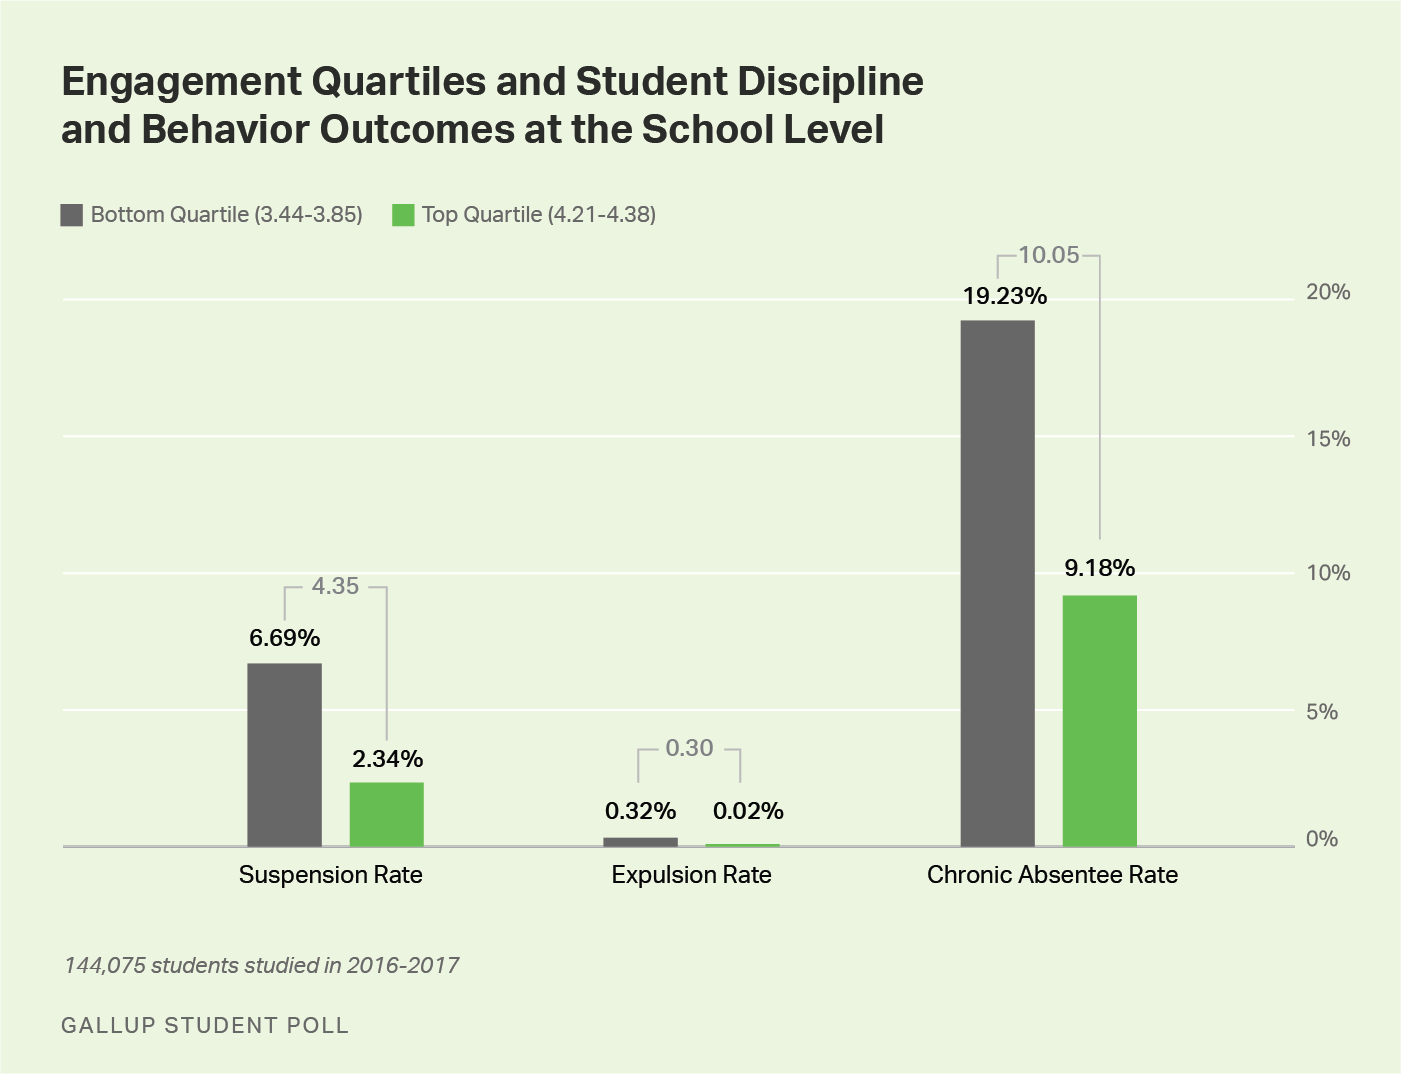 Line graph. Suspension rates, expulsion rates and chronic absentee rates are significantly lower among students in the top quartile of engagement compared with those in the bottom quartile.